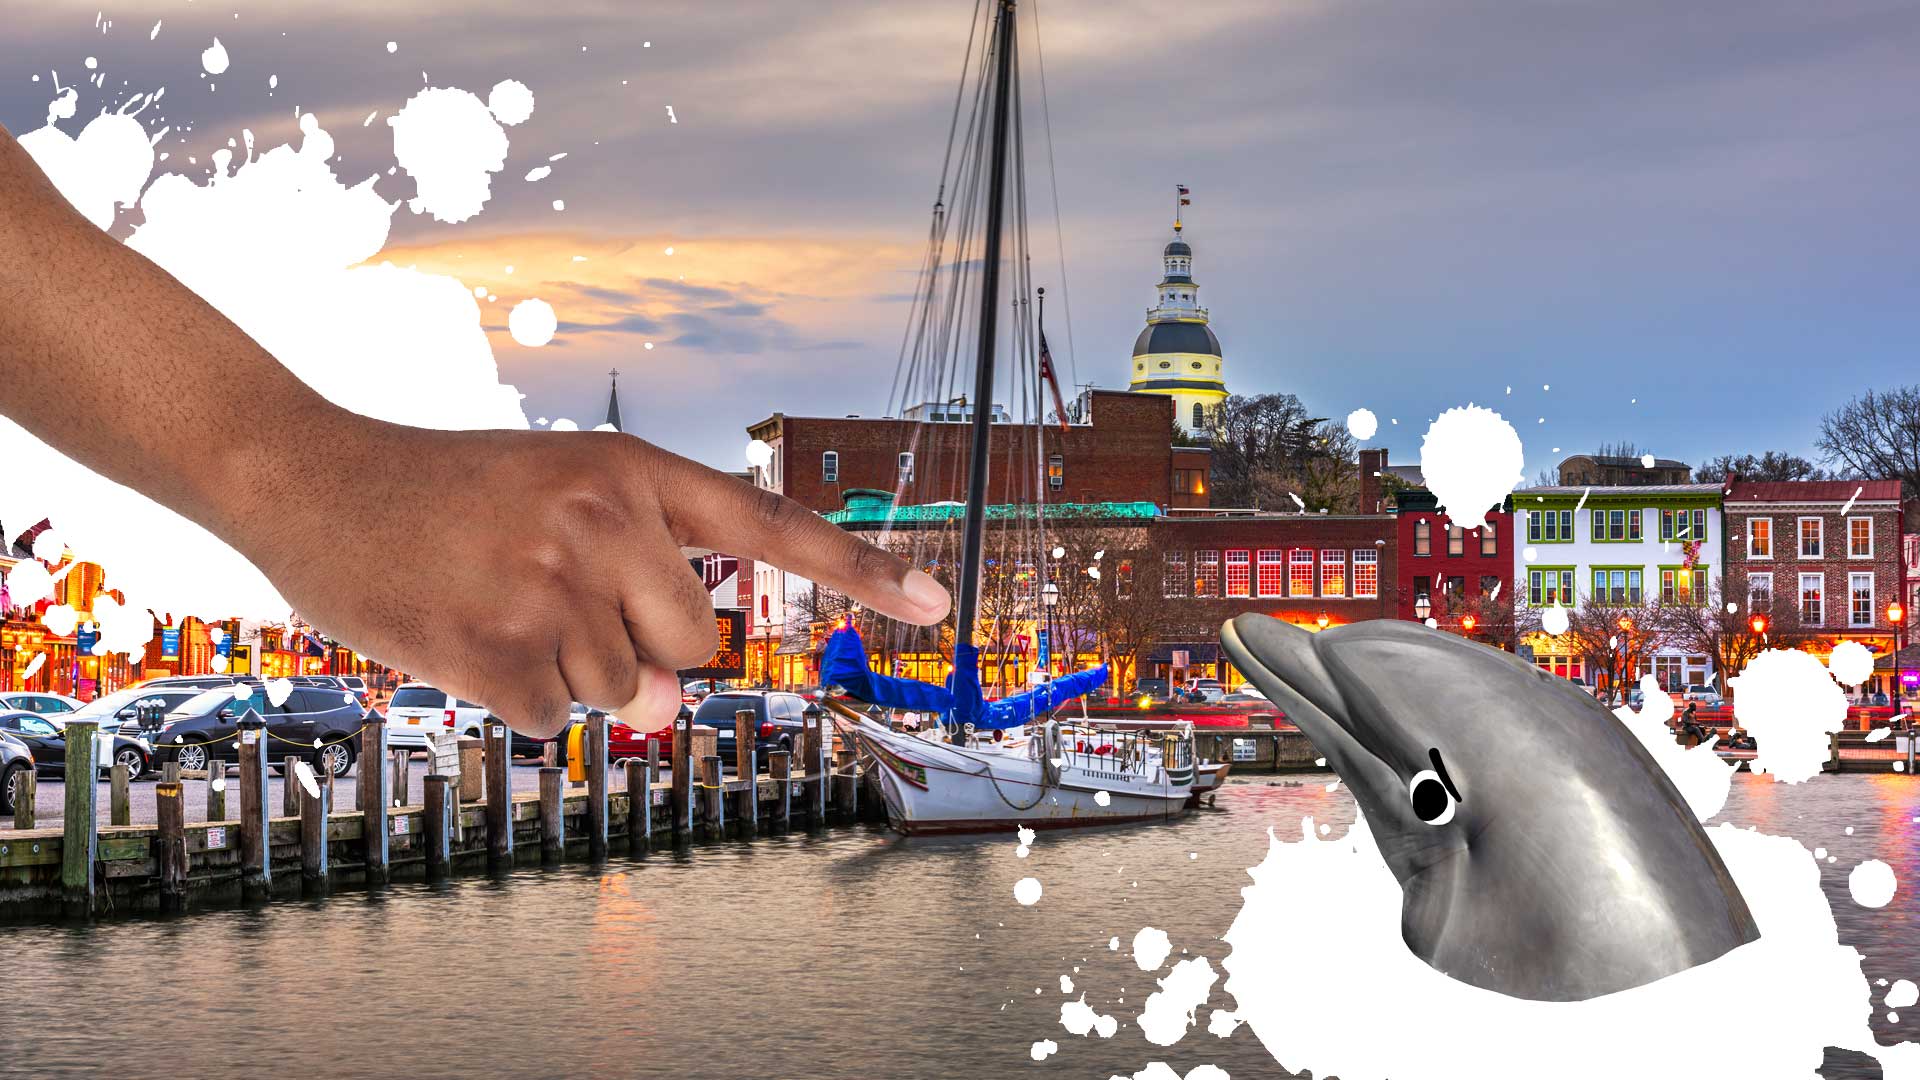 A dolphin visits the capital city of Maryland